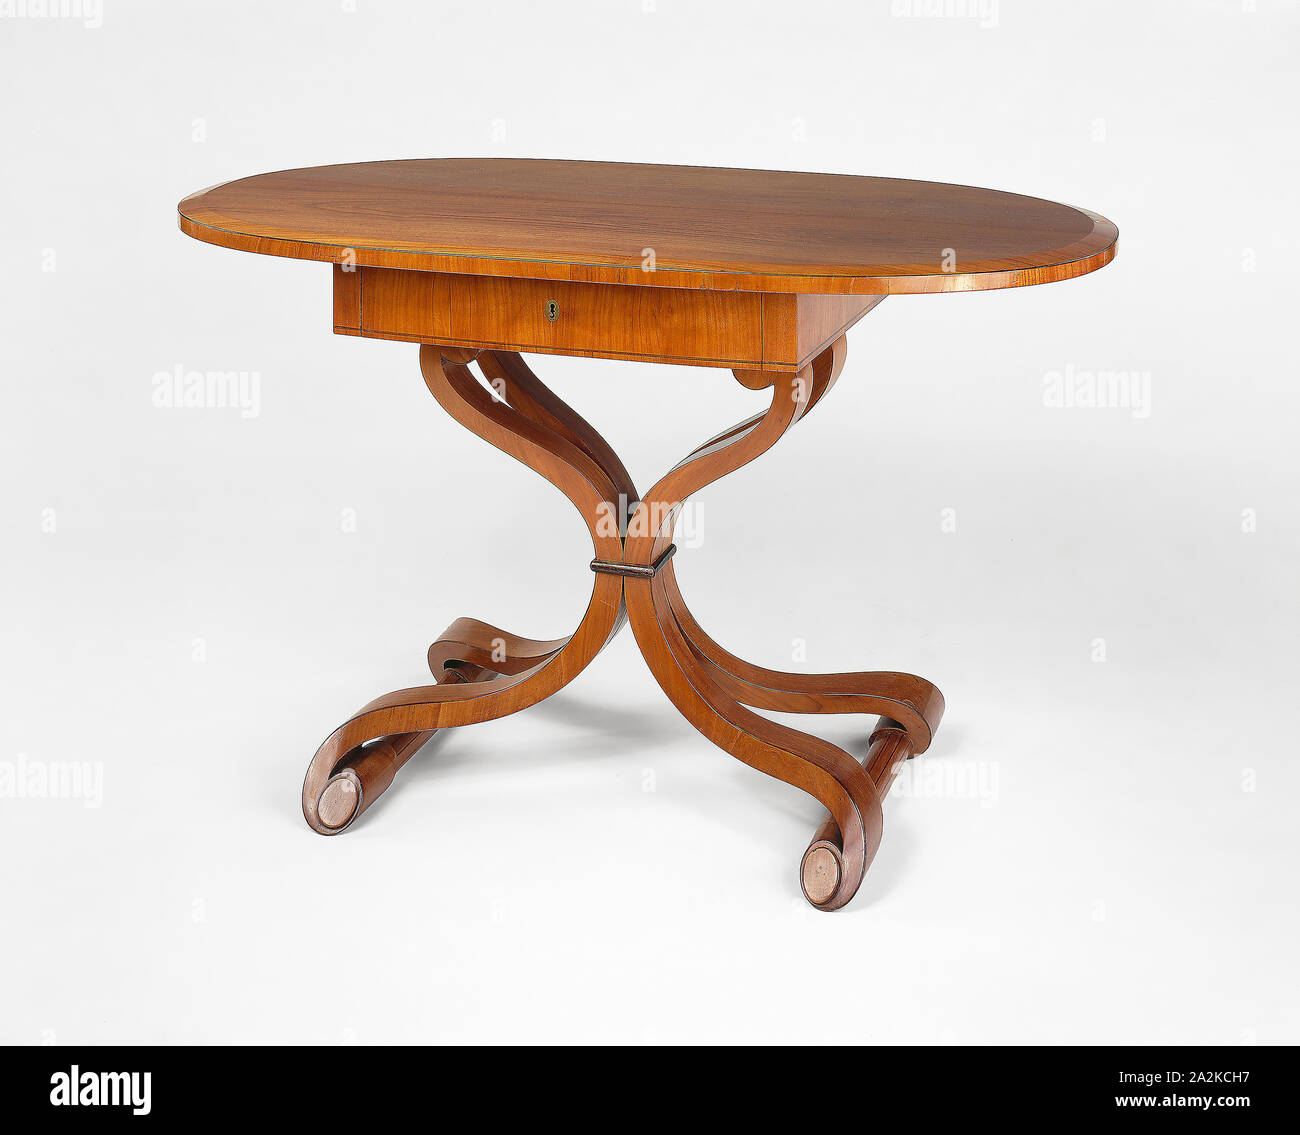 Center Table, c. 1820, Made by the Firm of Josef Danhauser (father and son, 1804-1838), Josef Danhauser, Sr. (Austrian, 1780-1829) and Josef Danhauser, Jr. (Austrian, 1805-1845), Vienna, Austria, Vienna, Cherrywood and metal, 75 × 126 cm (29 1/2 × 49 1/2 in Stock Photo